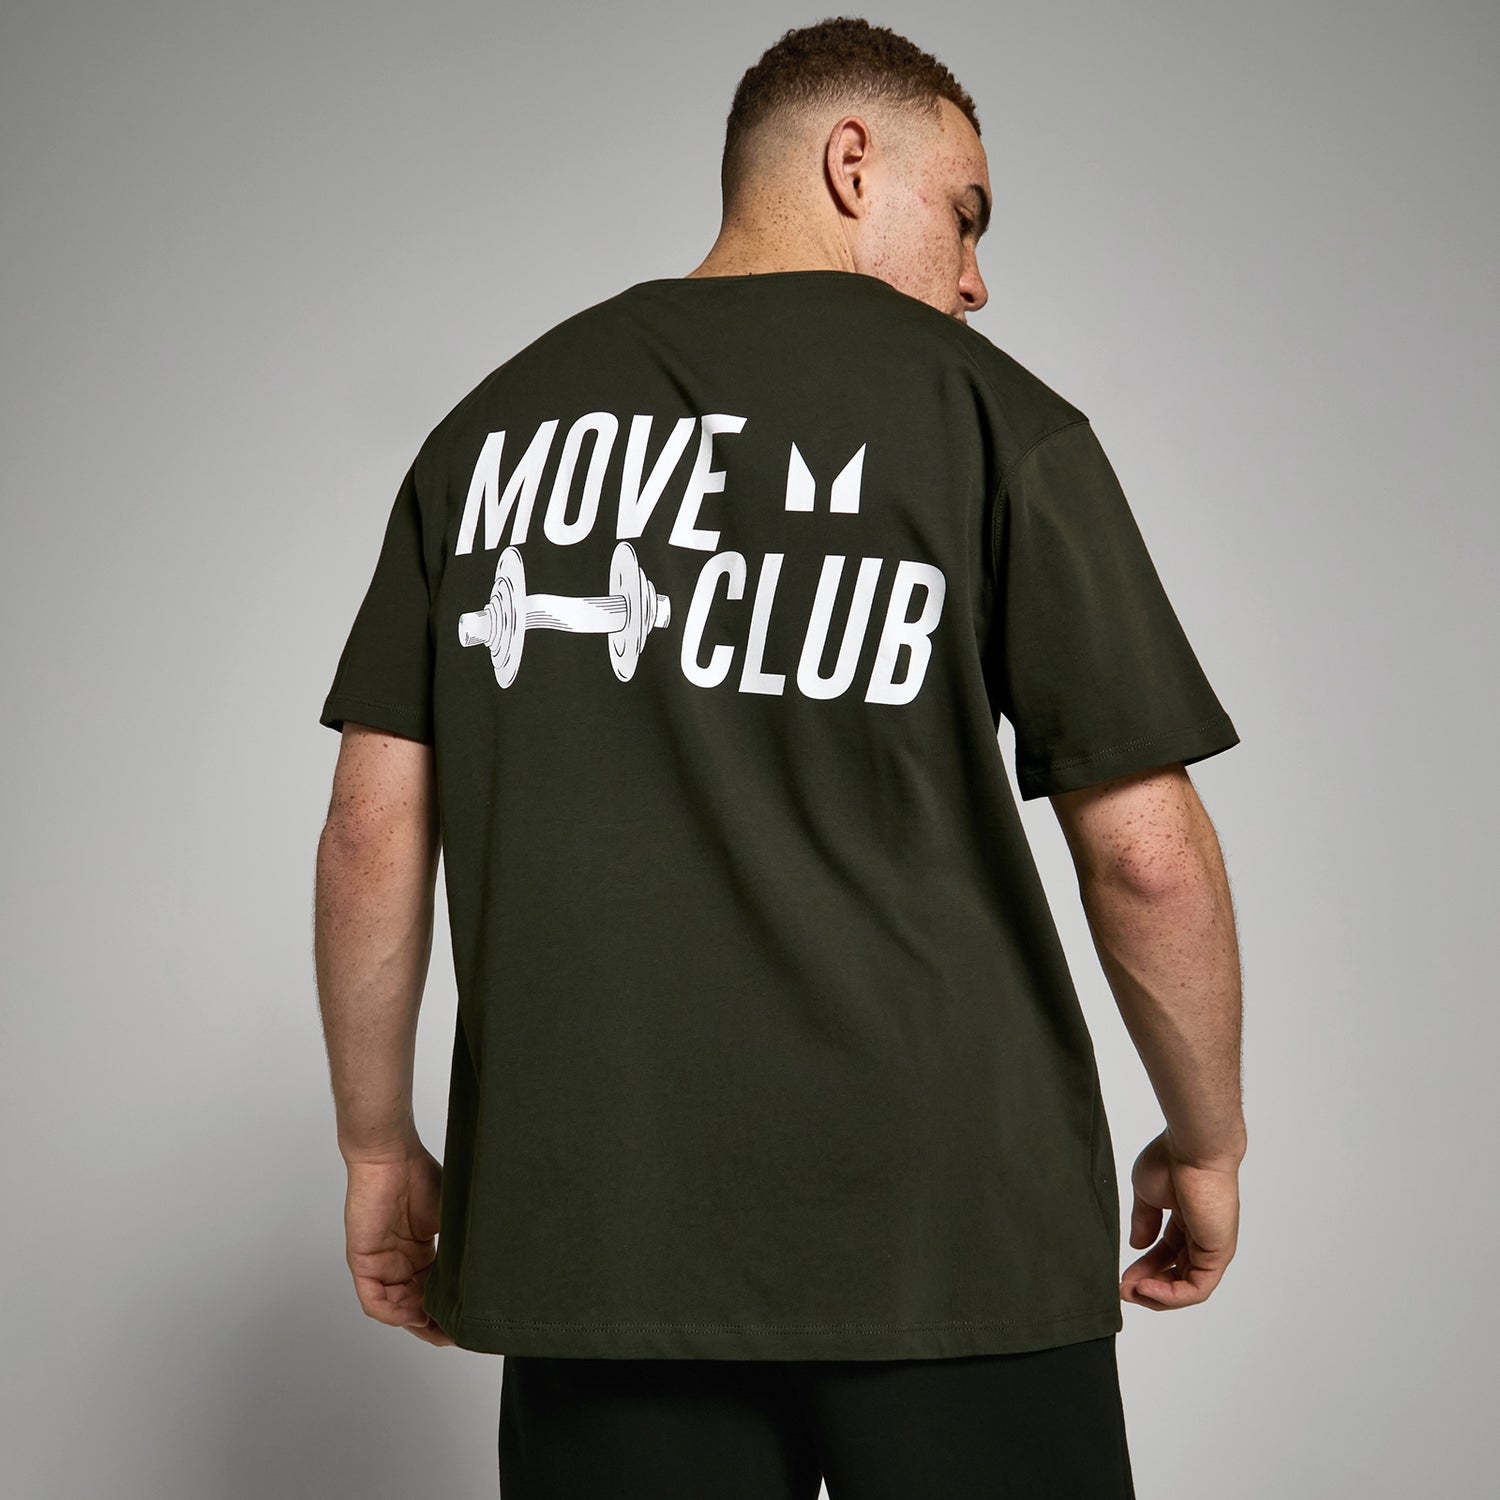 MP Oversized Move Club T-Shirt – Forest Green - XXS - XS